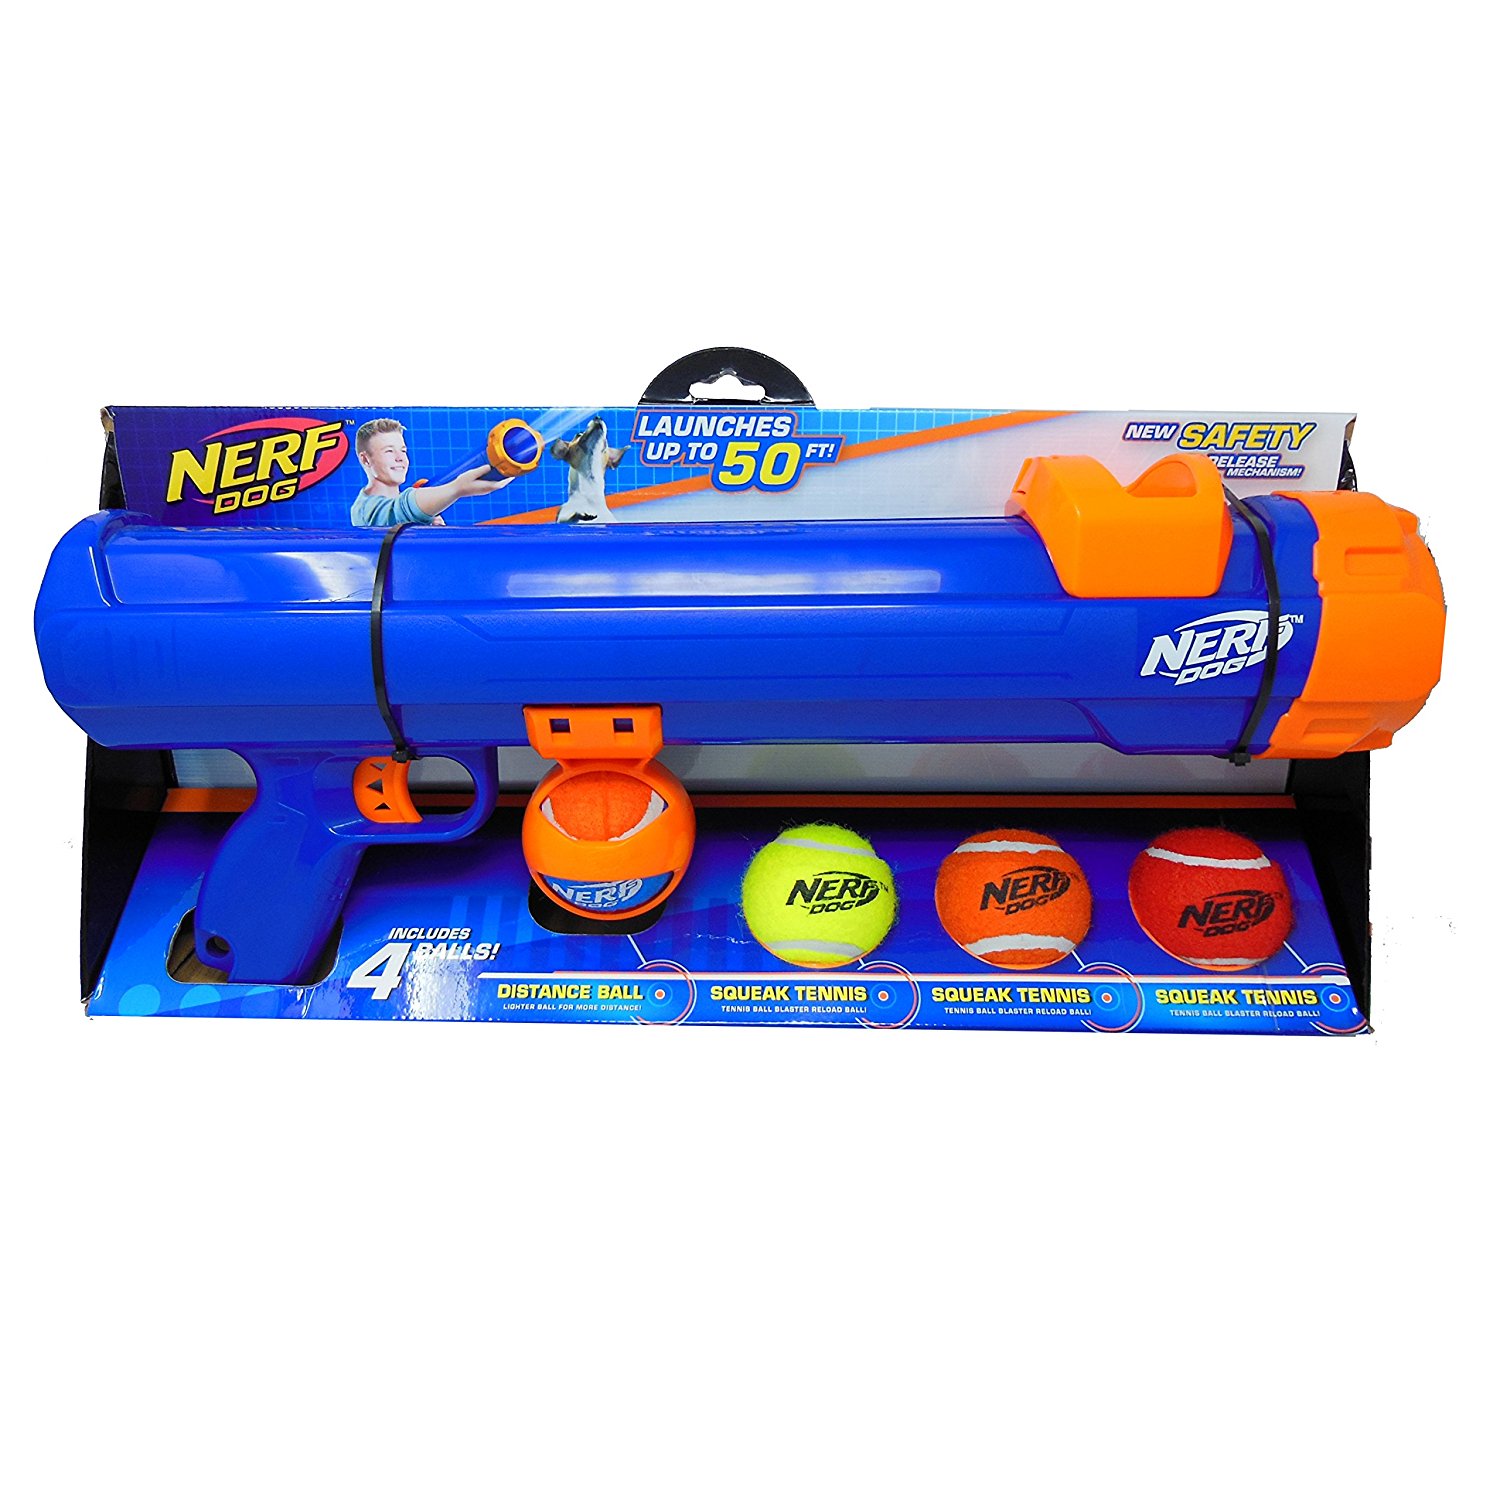 Nerf dog tennis ball blaster is great for service dogs.